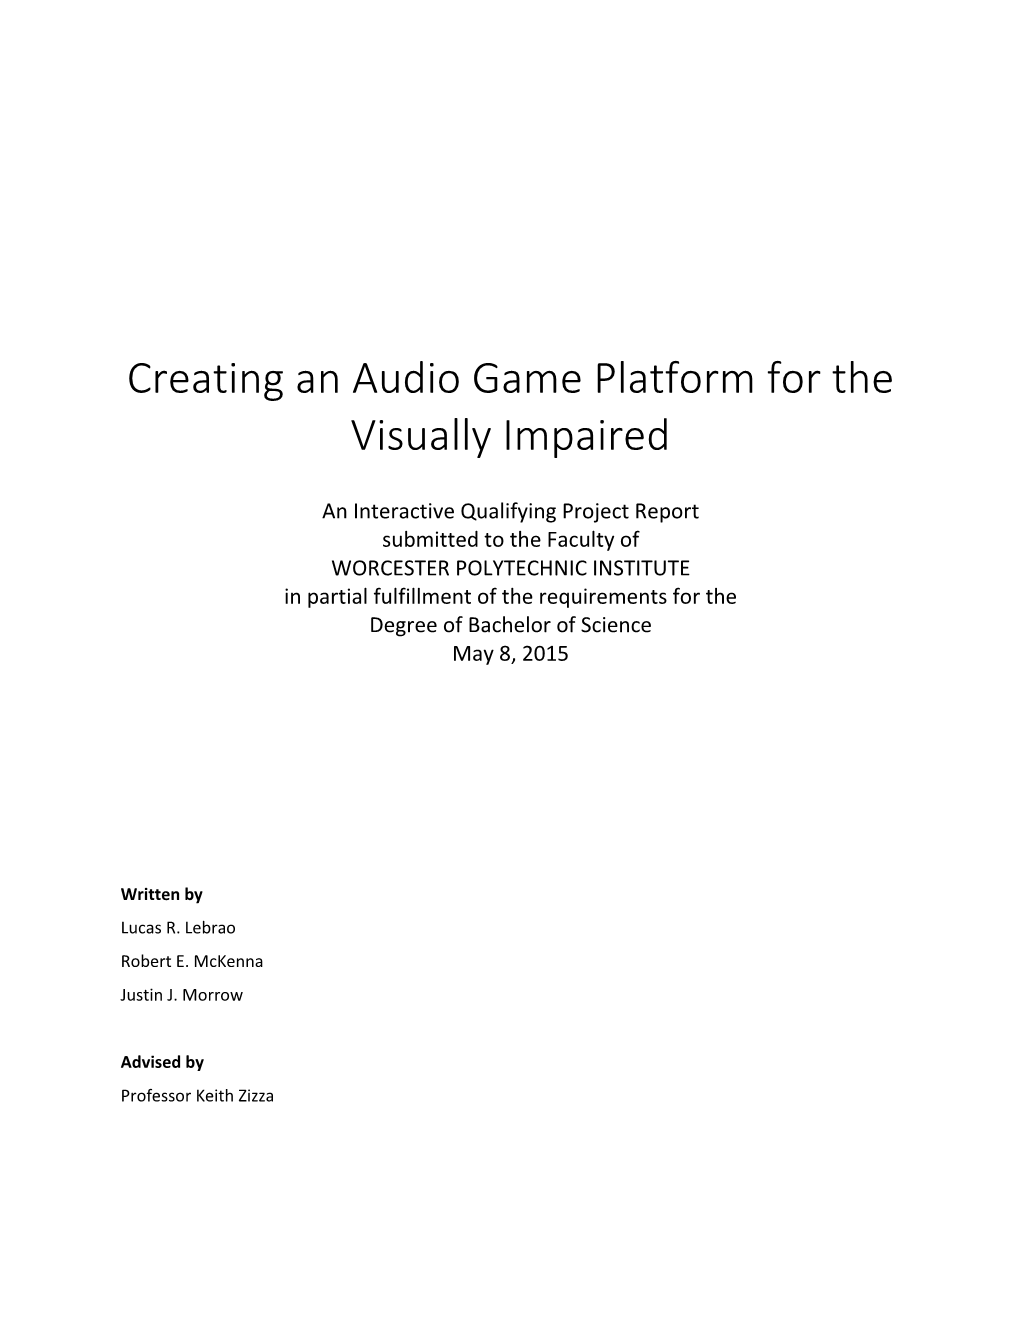 Creating an Audio Game Platform for the Visually Impaired